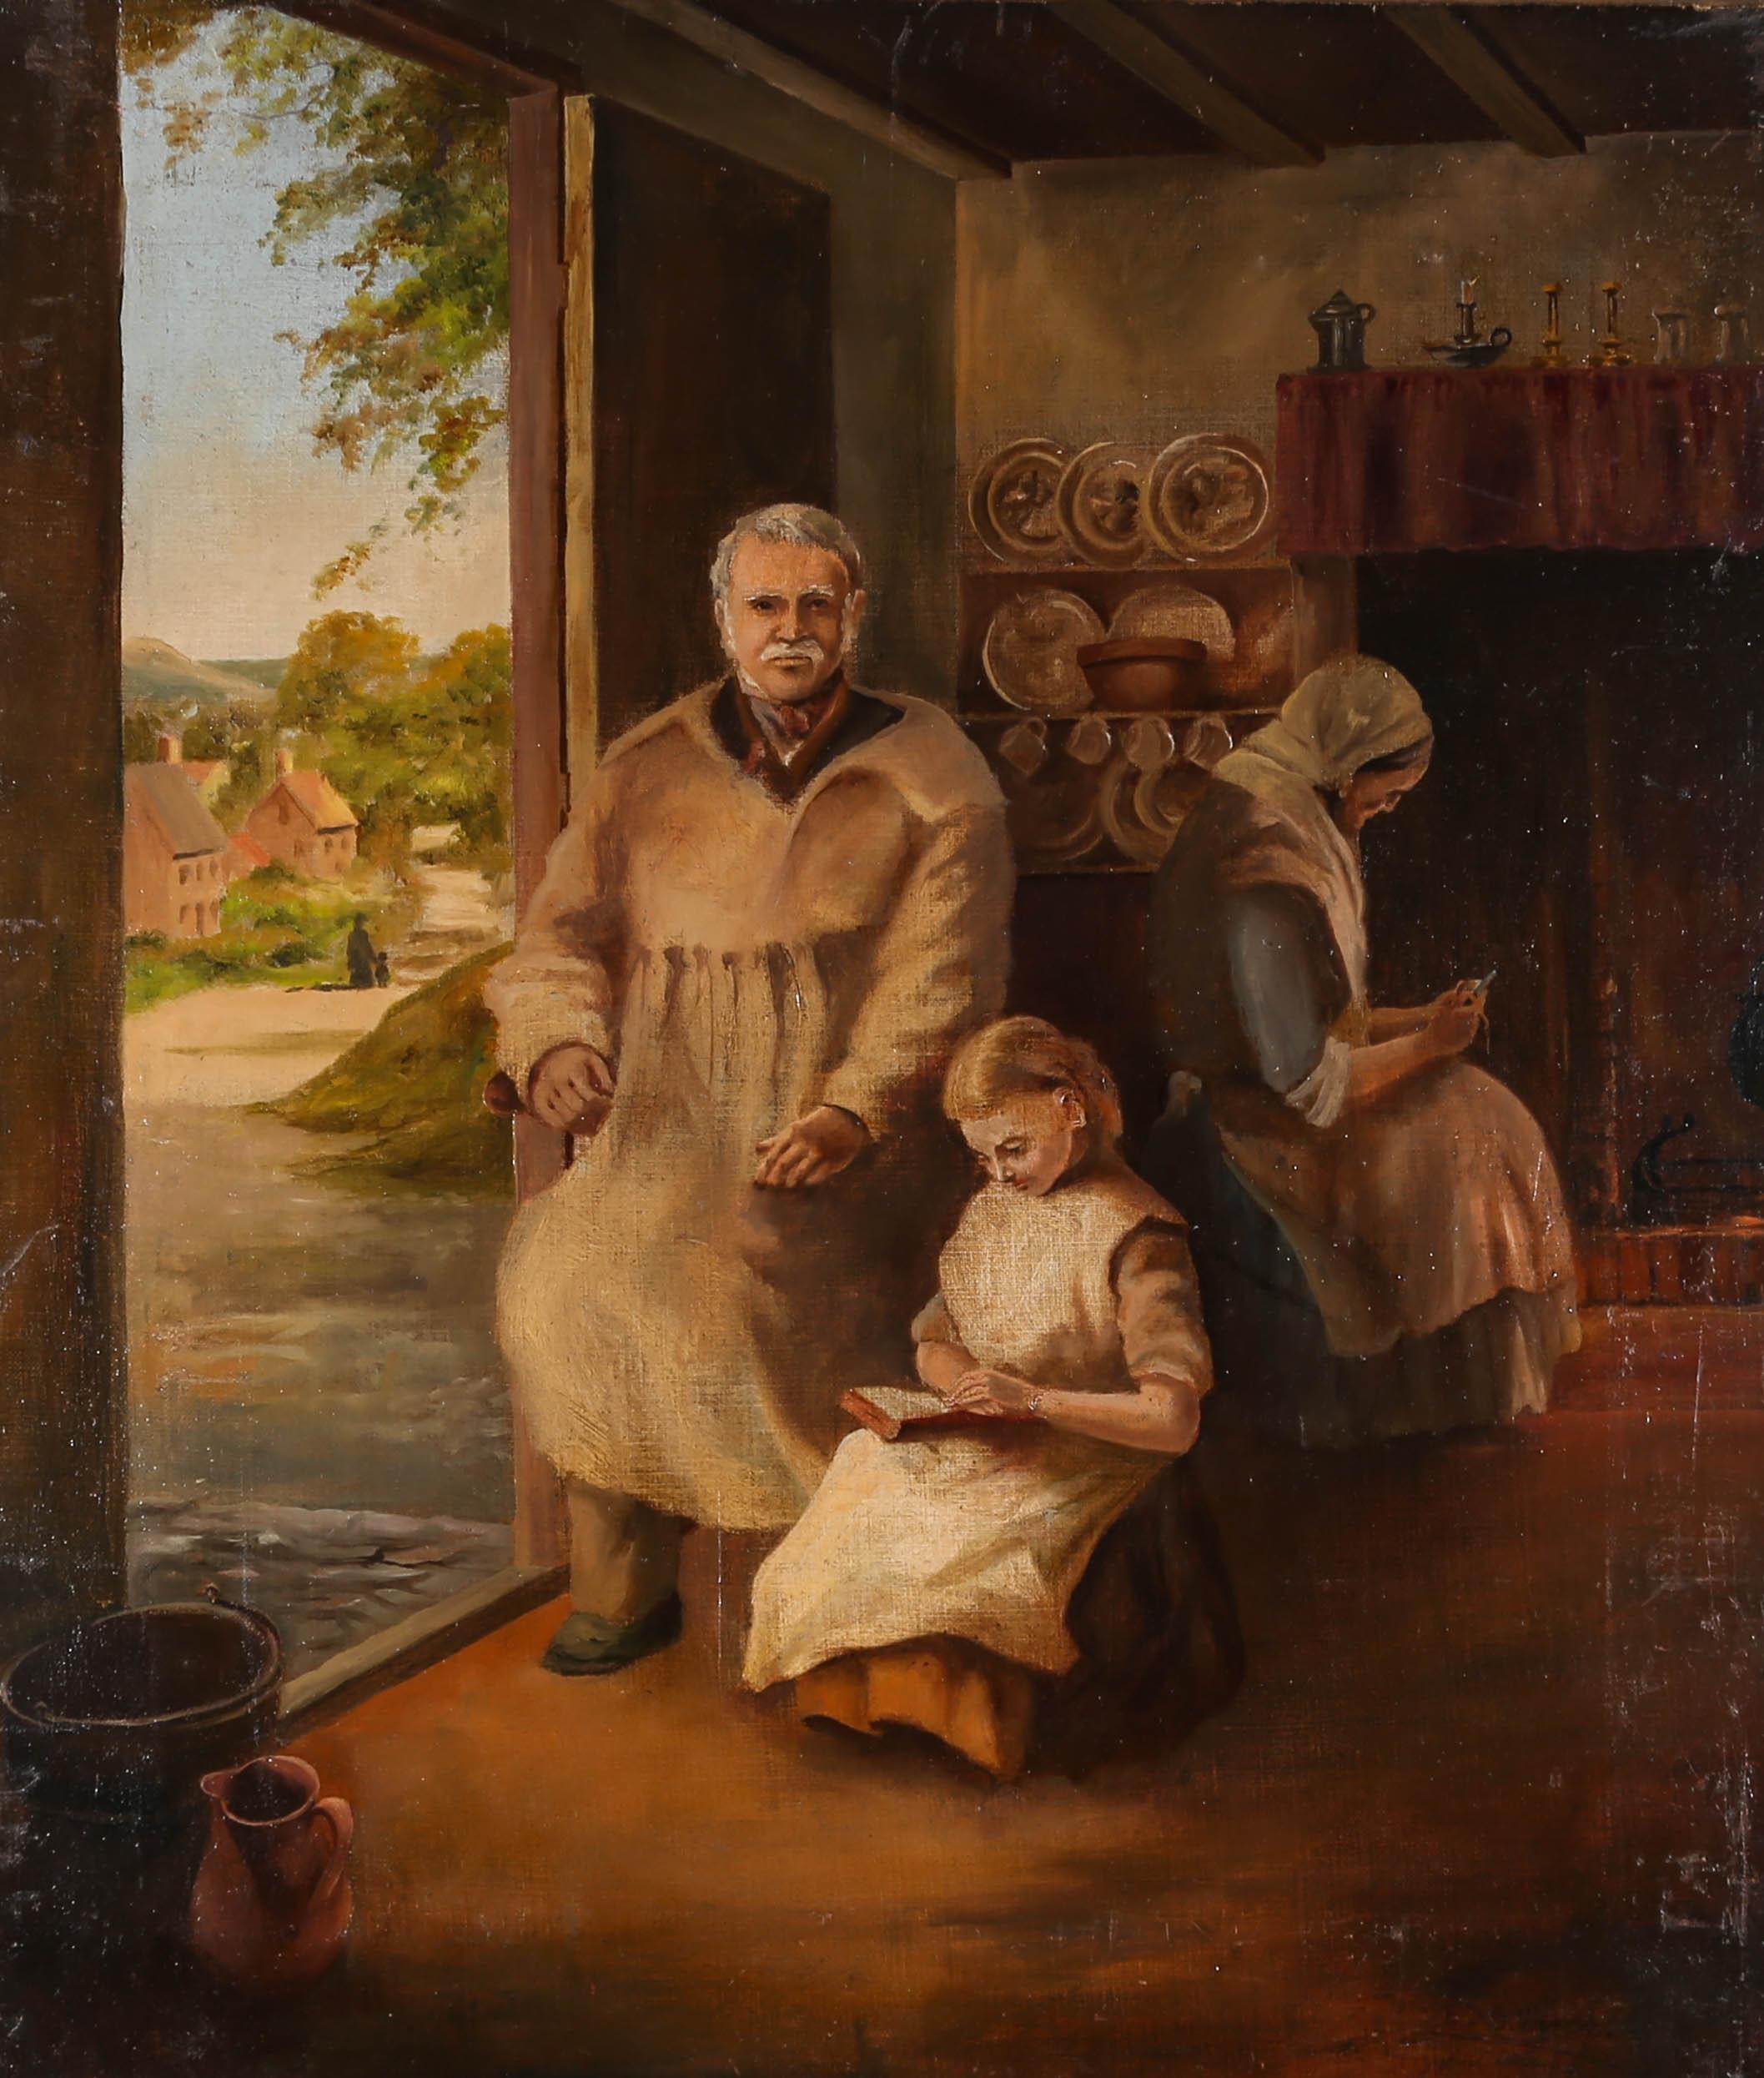 A charming late 19th Century interior scene with later over painting. The scene shows a father (wearing a linen smock often worn by working men over their smarter clothes to keep them from getting dirty) sitting in the doorway of his humble home,